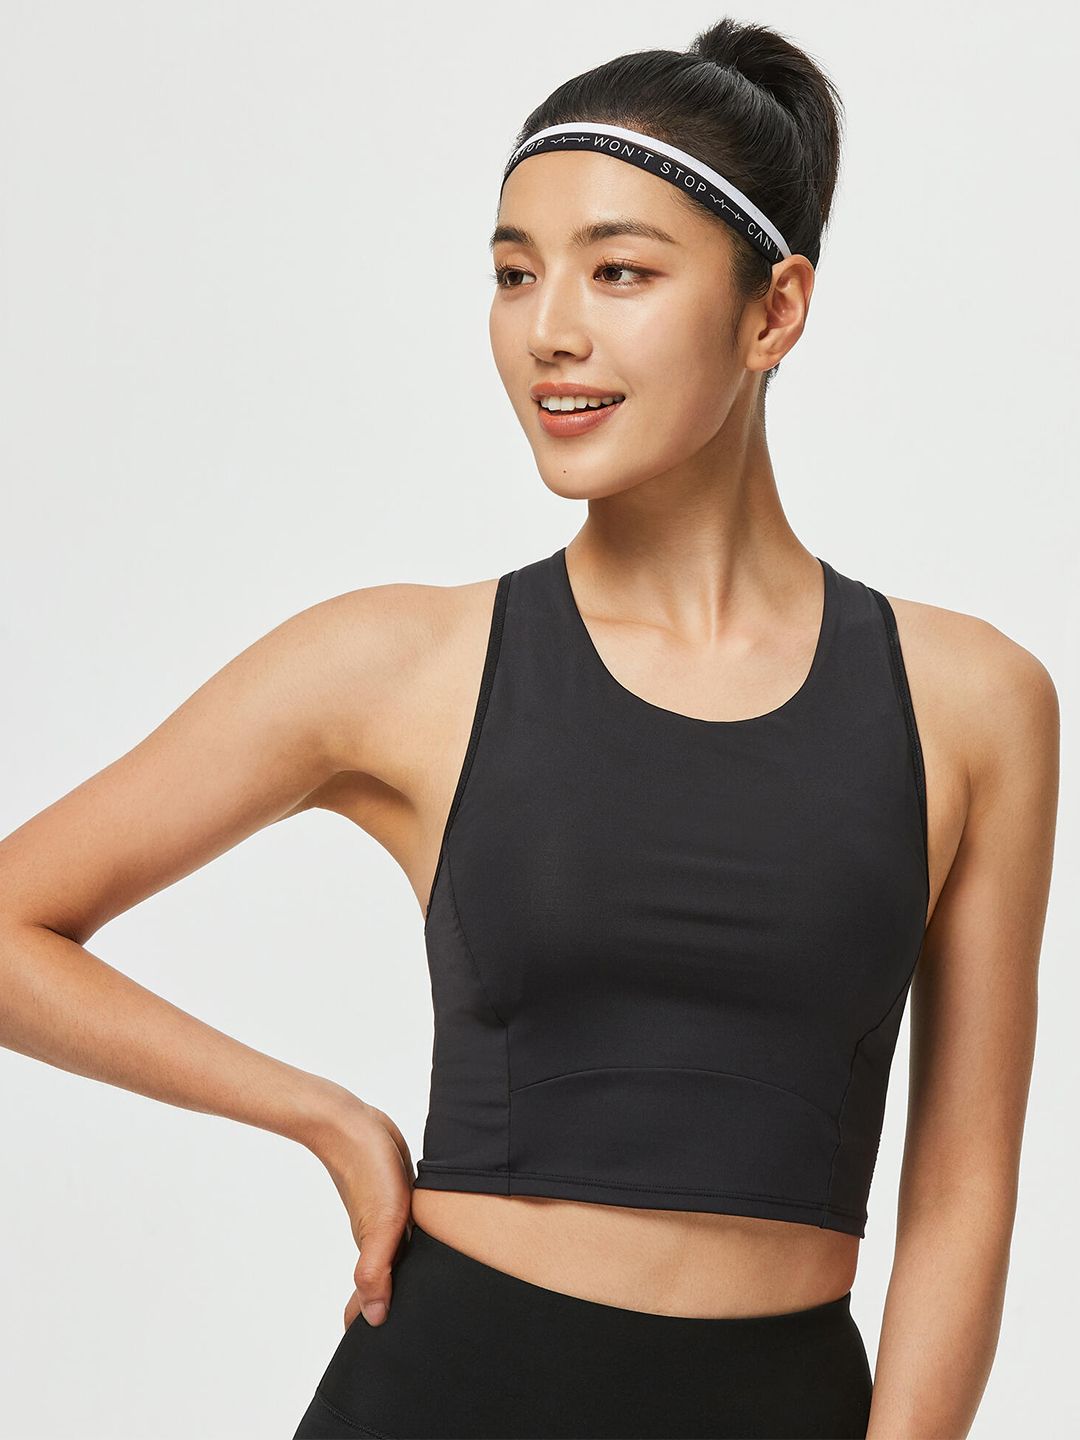 Domyos By Decathlon Black Moderate Support Cropped Fitness Sports Bra 540 Price in India